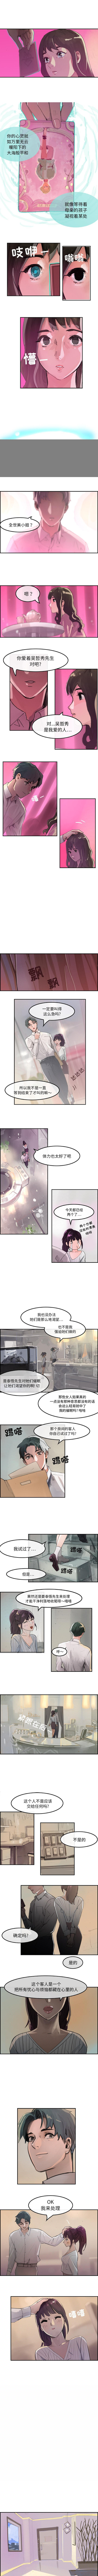 Cum Swallowing 任何小姐 1-31 Sloppy - Page 10